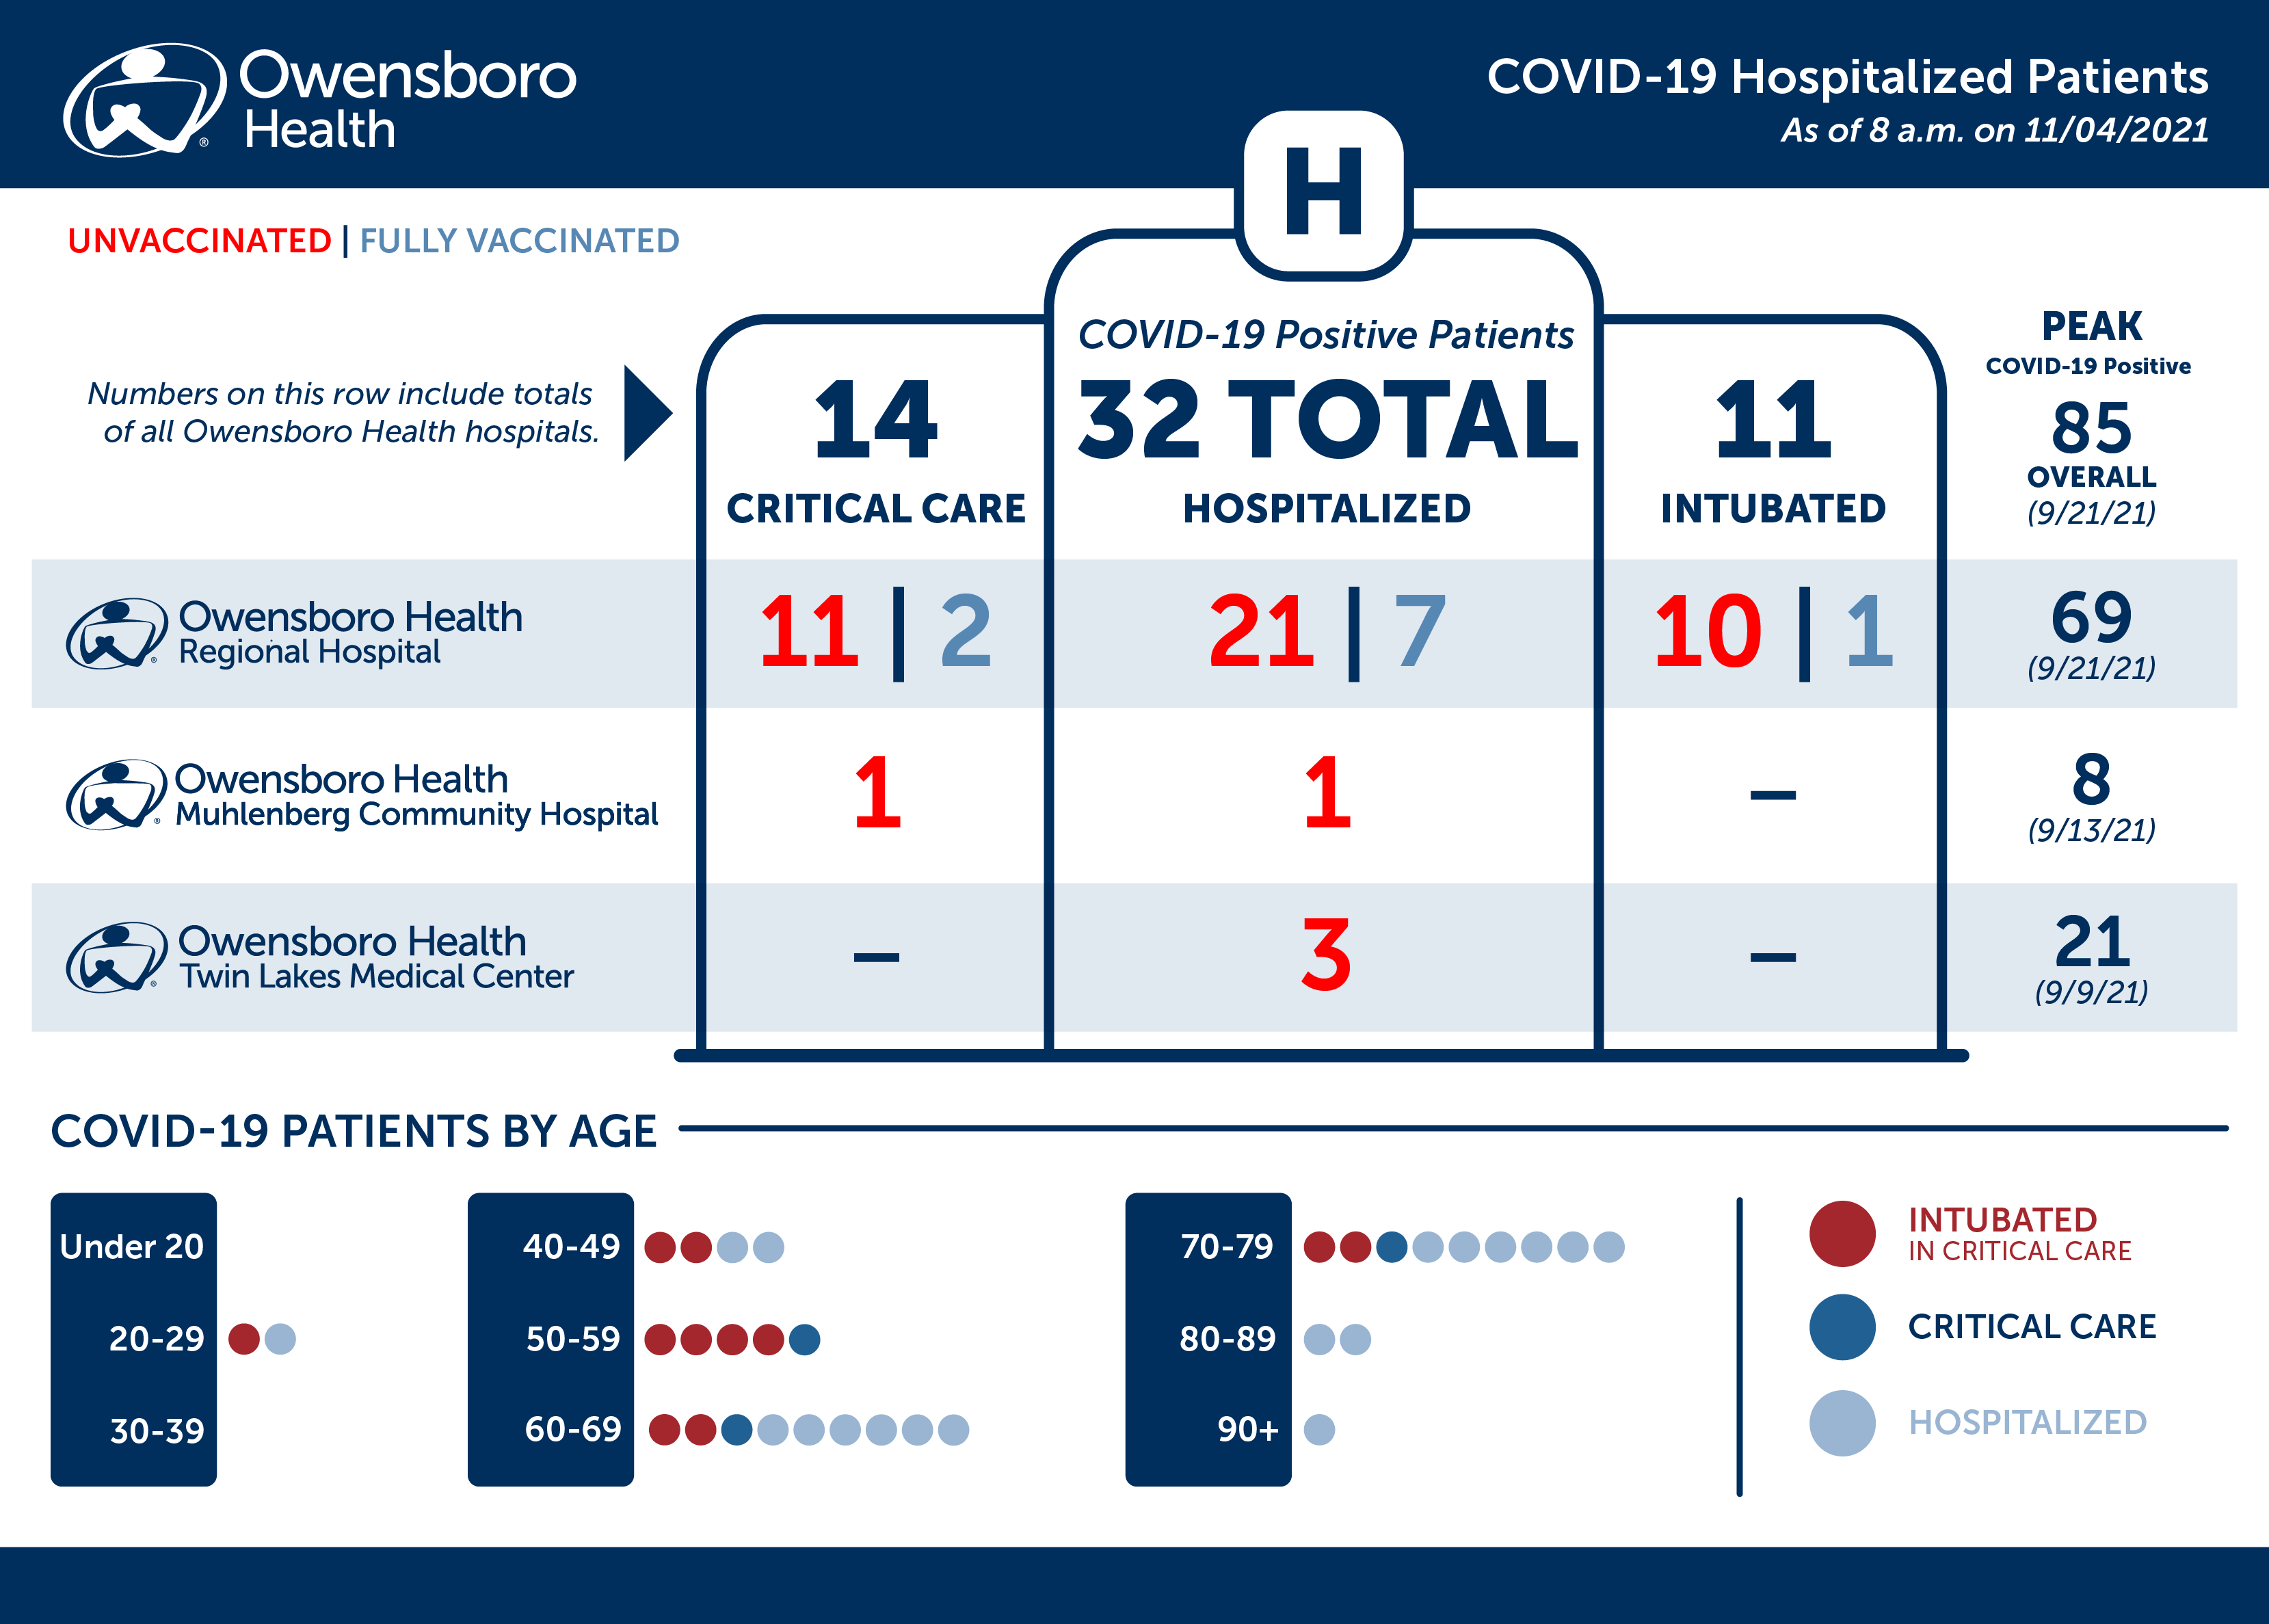 COVID-19 Hospitalized Patients on November 4, 2021